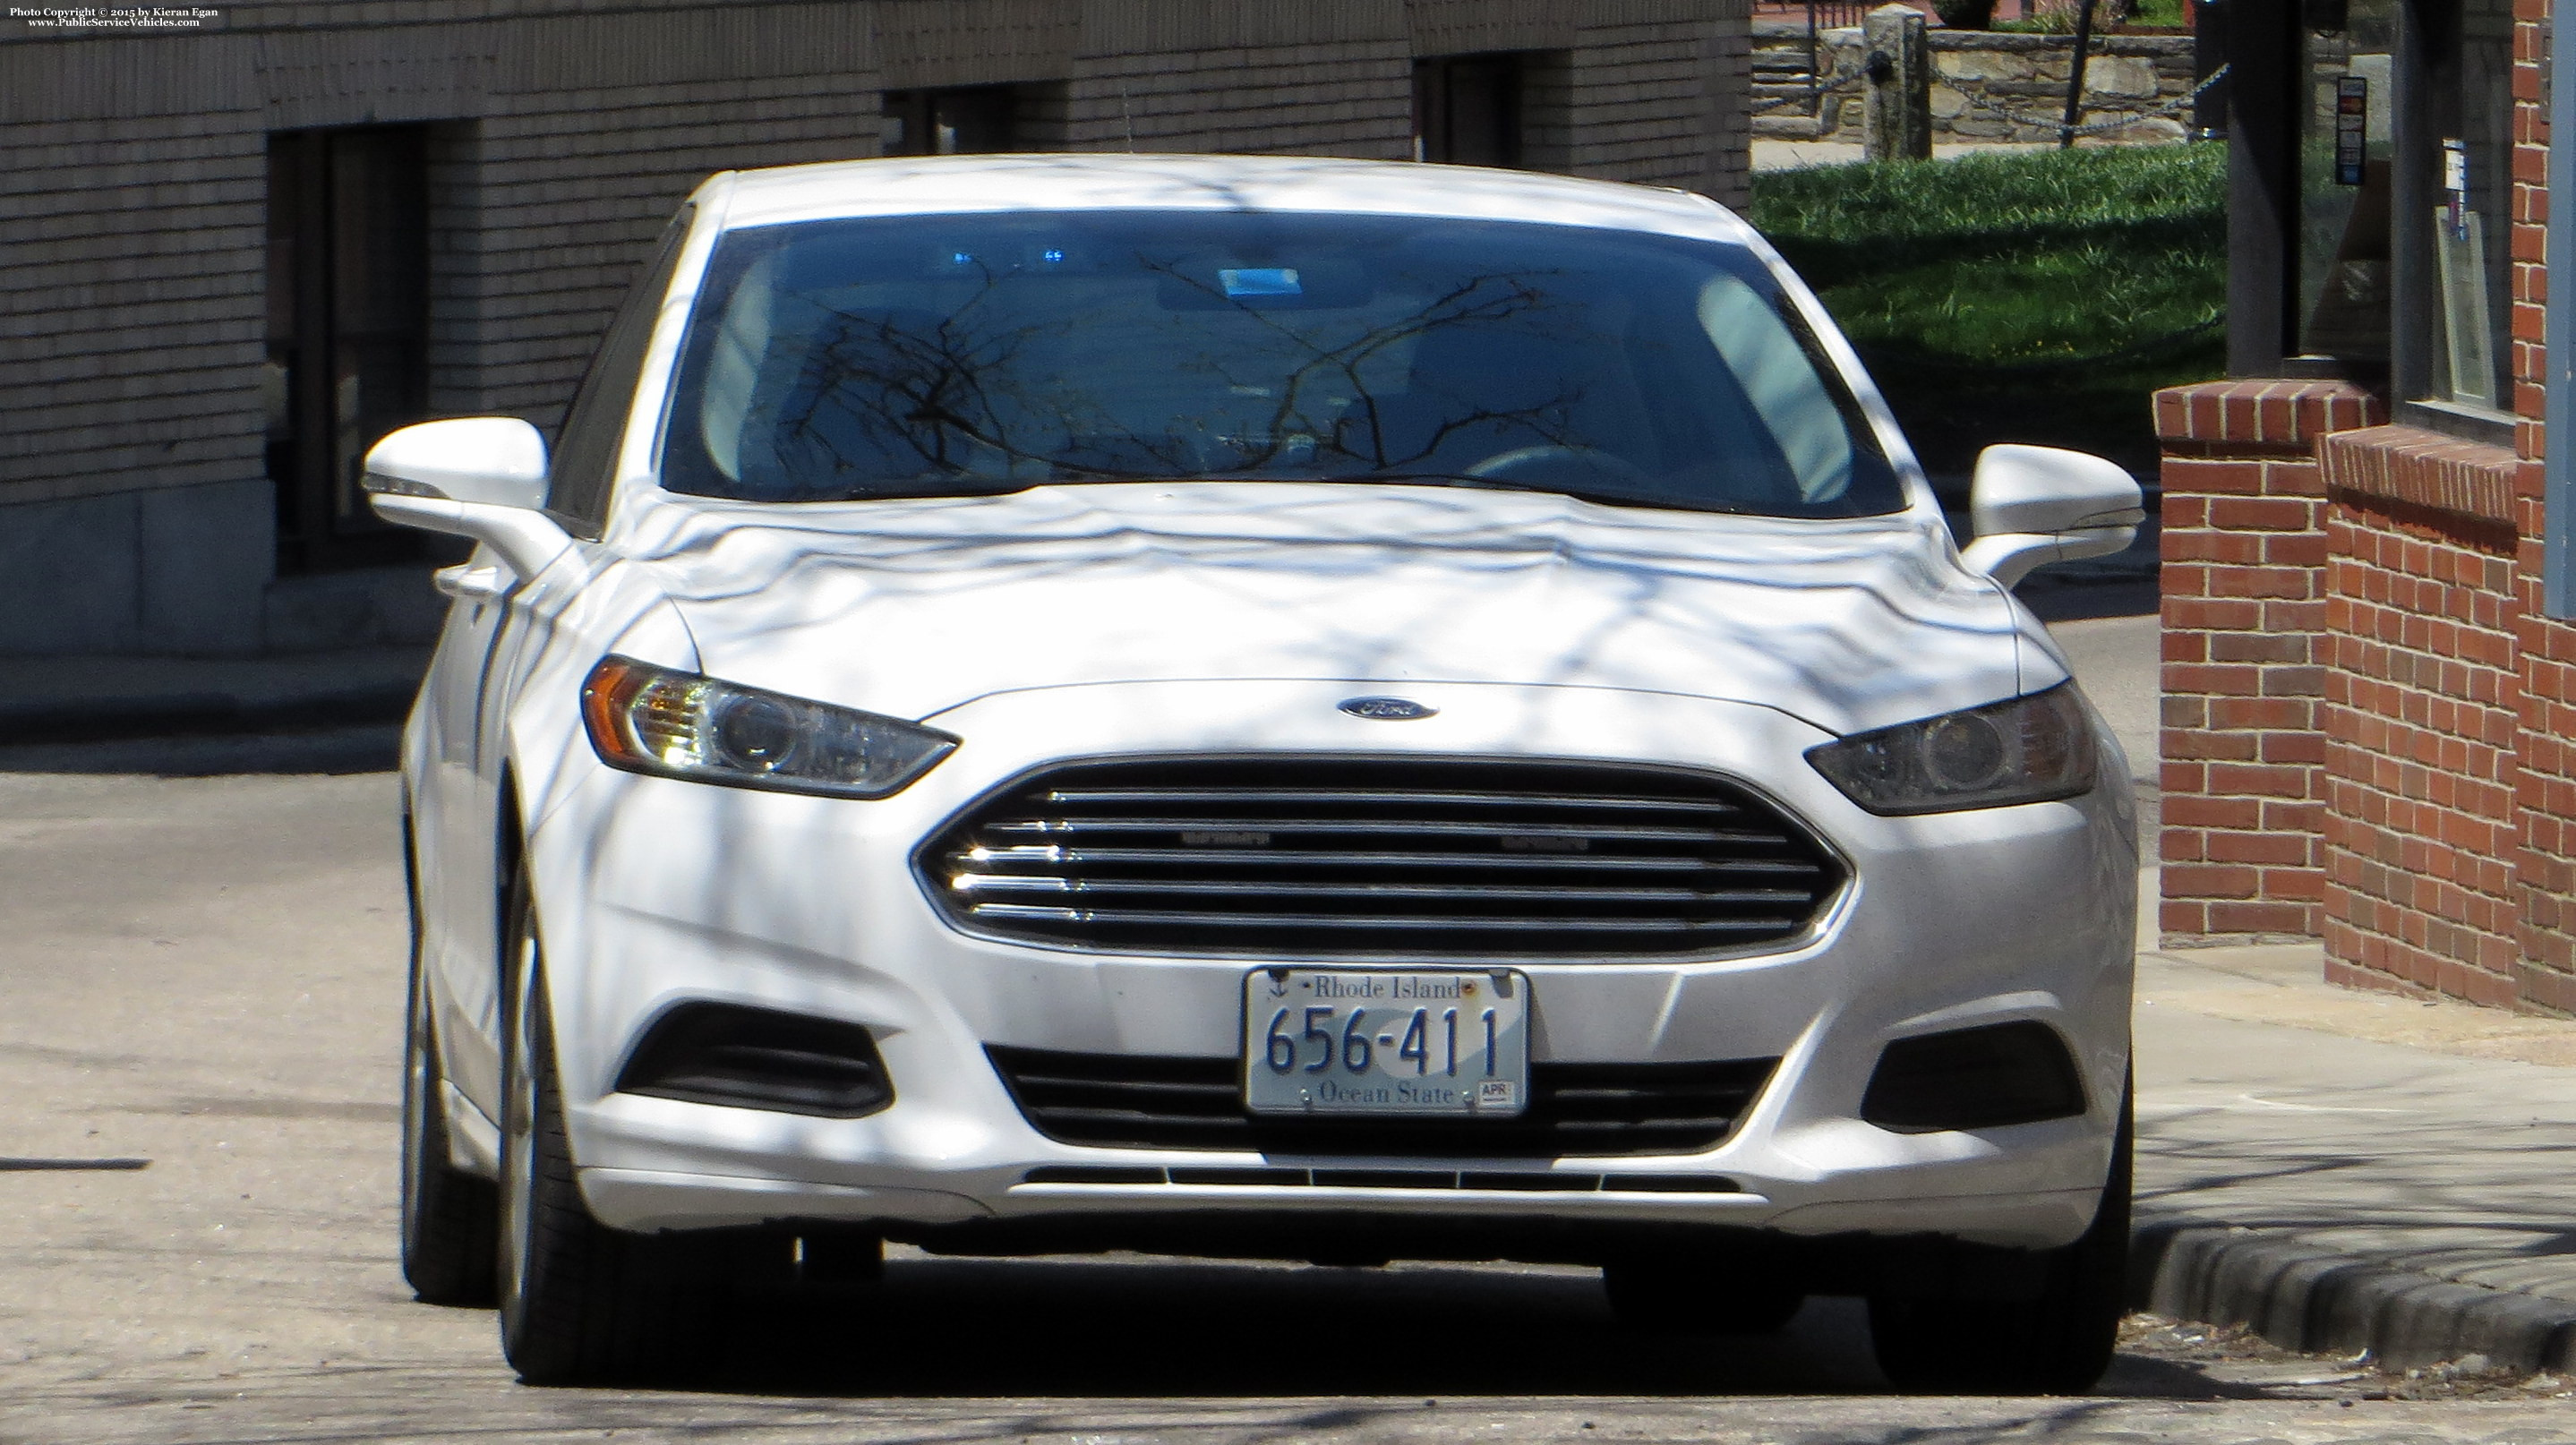 A photo  of Newport Police
            Unmarked Unit, a 2013-2014 Ford Fusion             taken by Kieran Egan